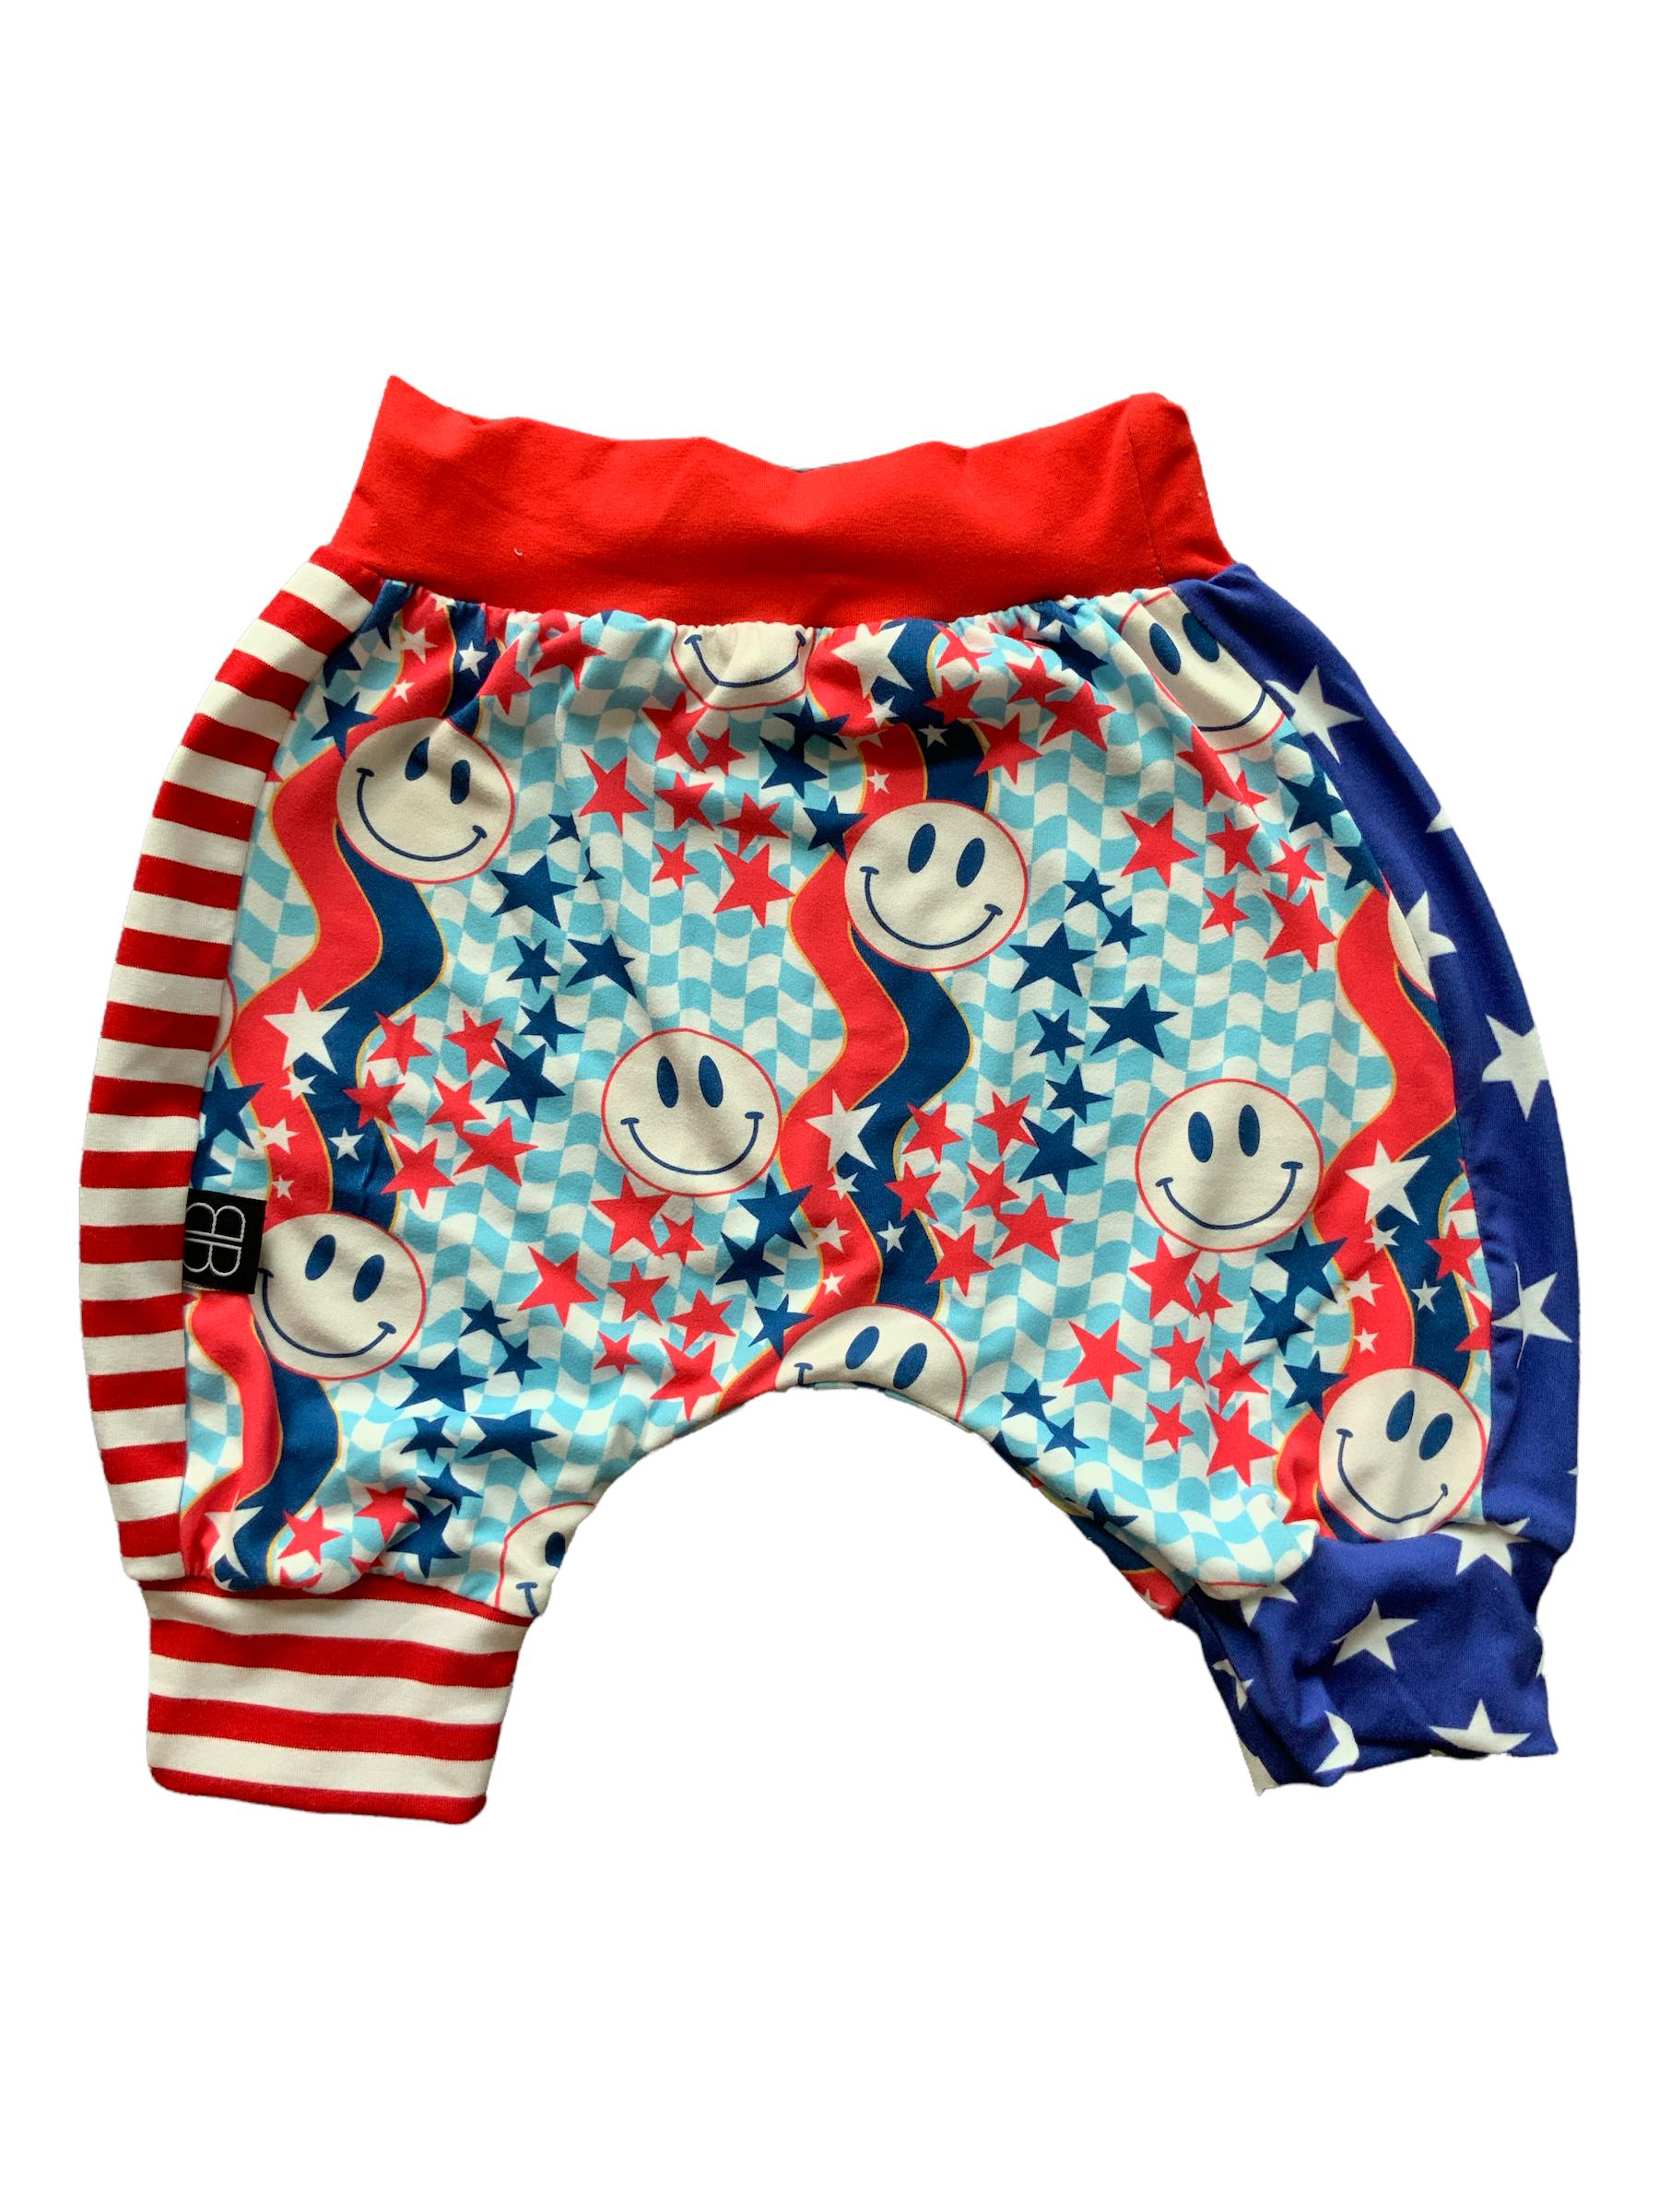 RTS 3T American Smiley sport euro crops - Baby Bums Clothing 